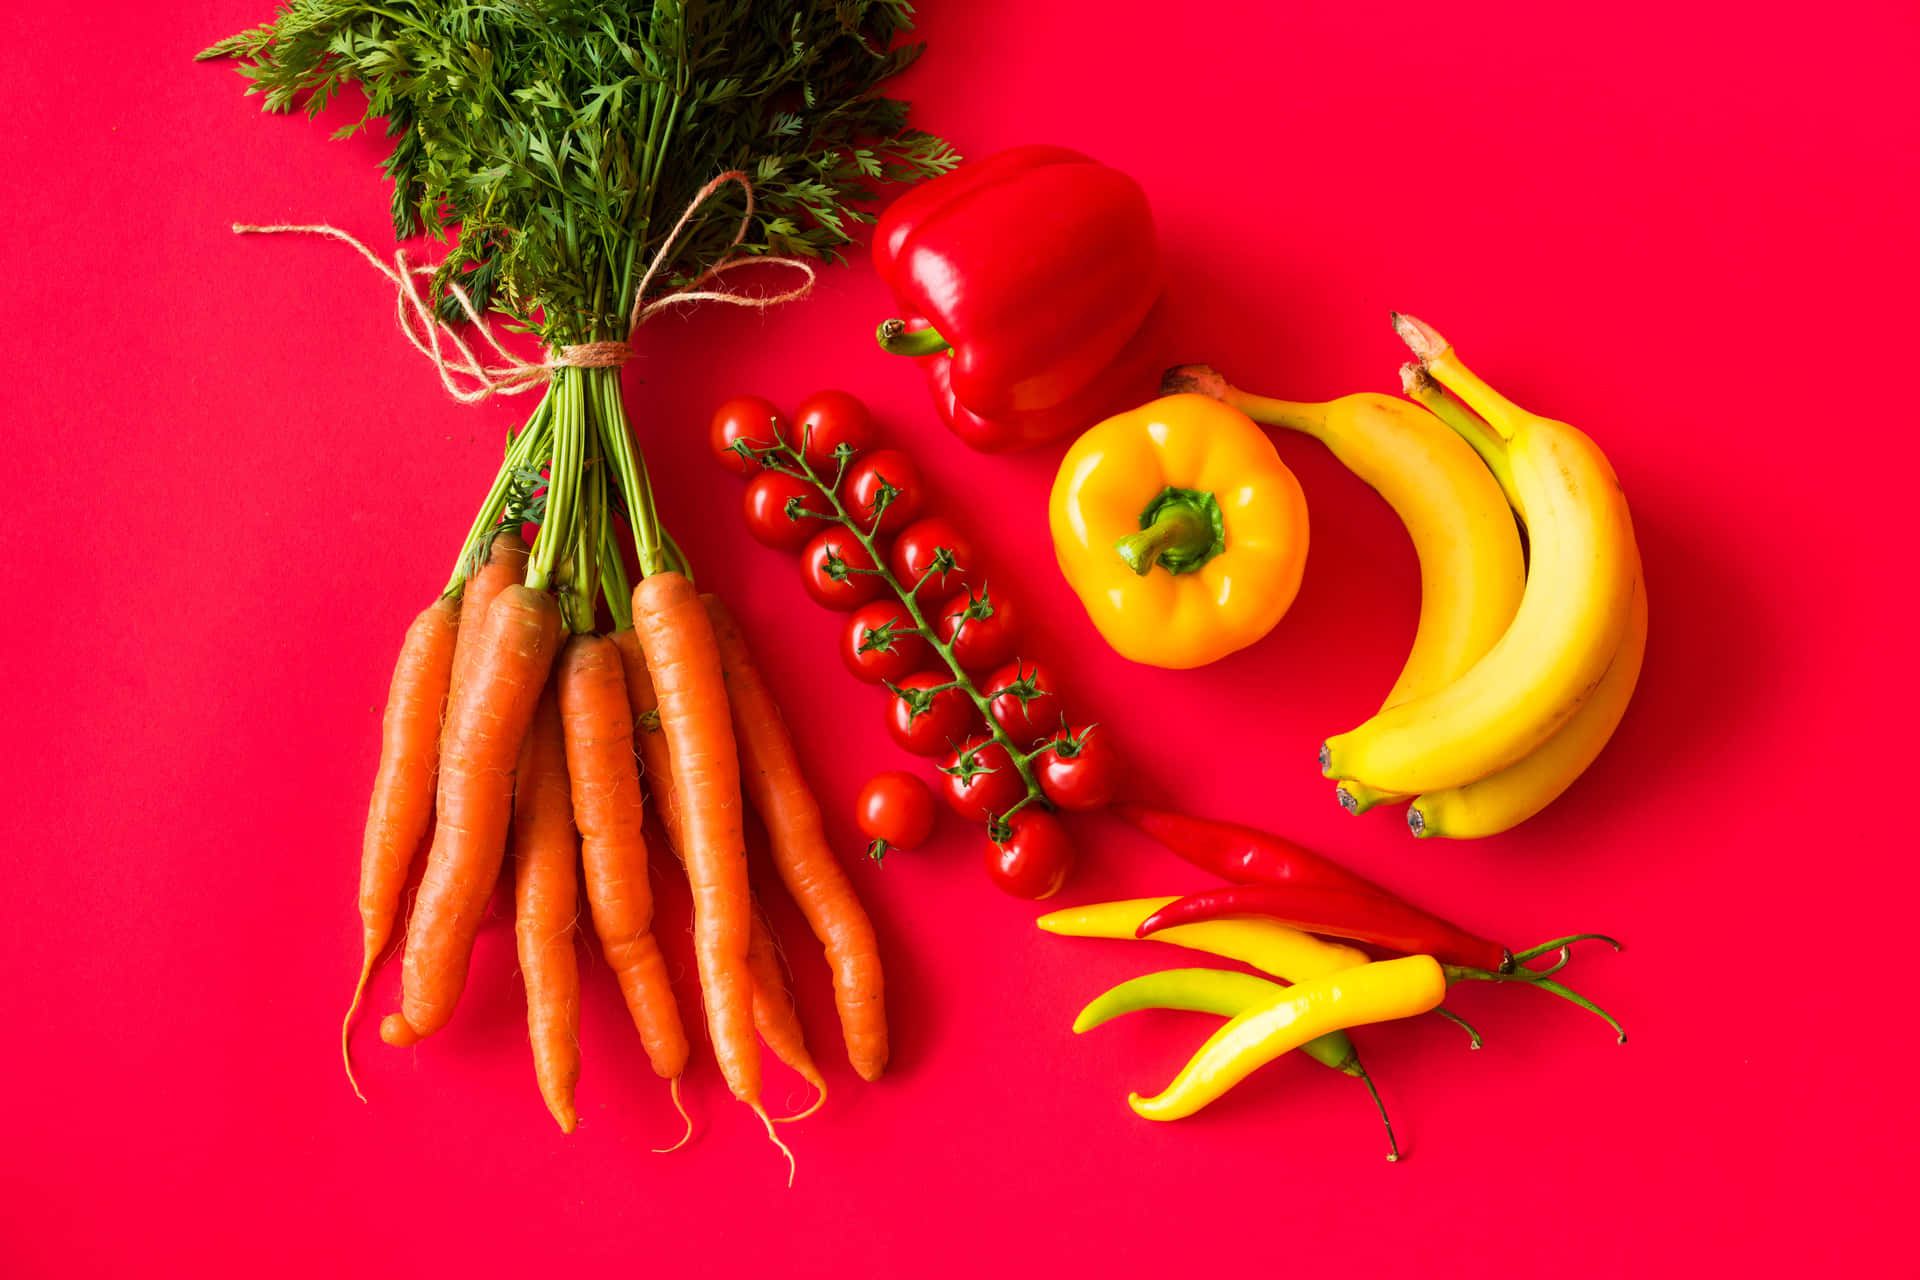 Fruits And Vegetable On A Red Surface Wallpaper